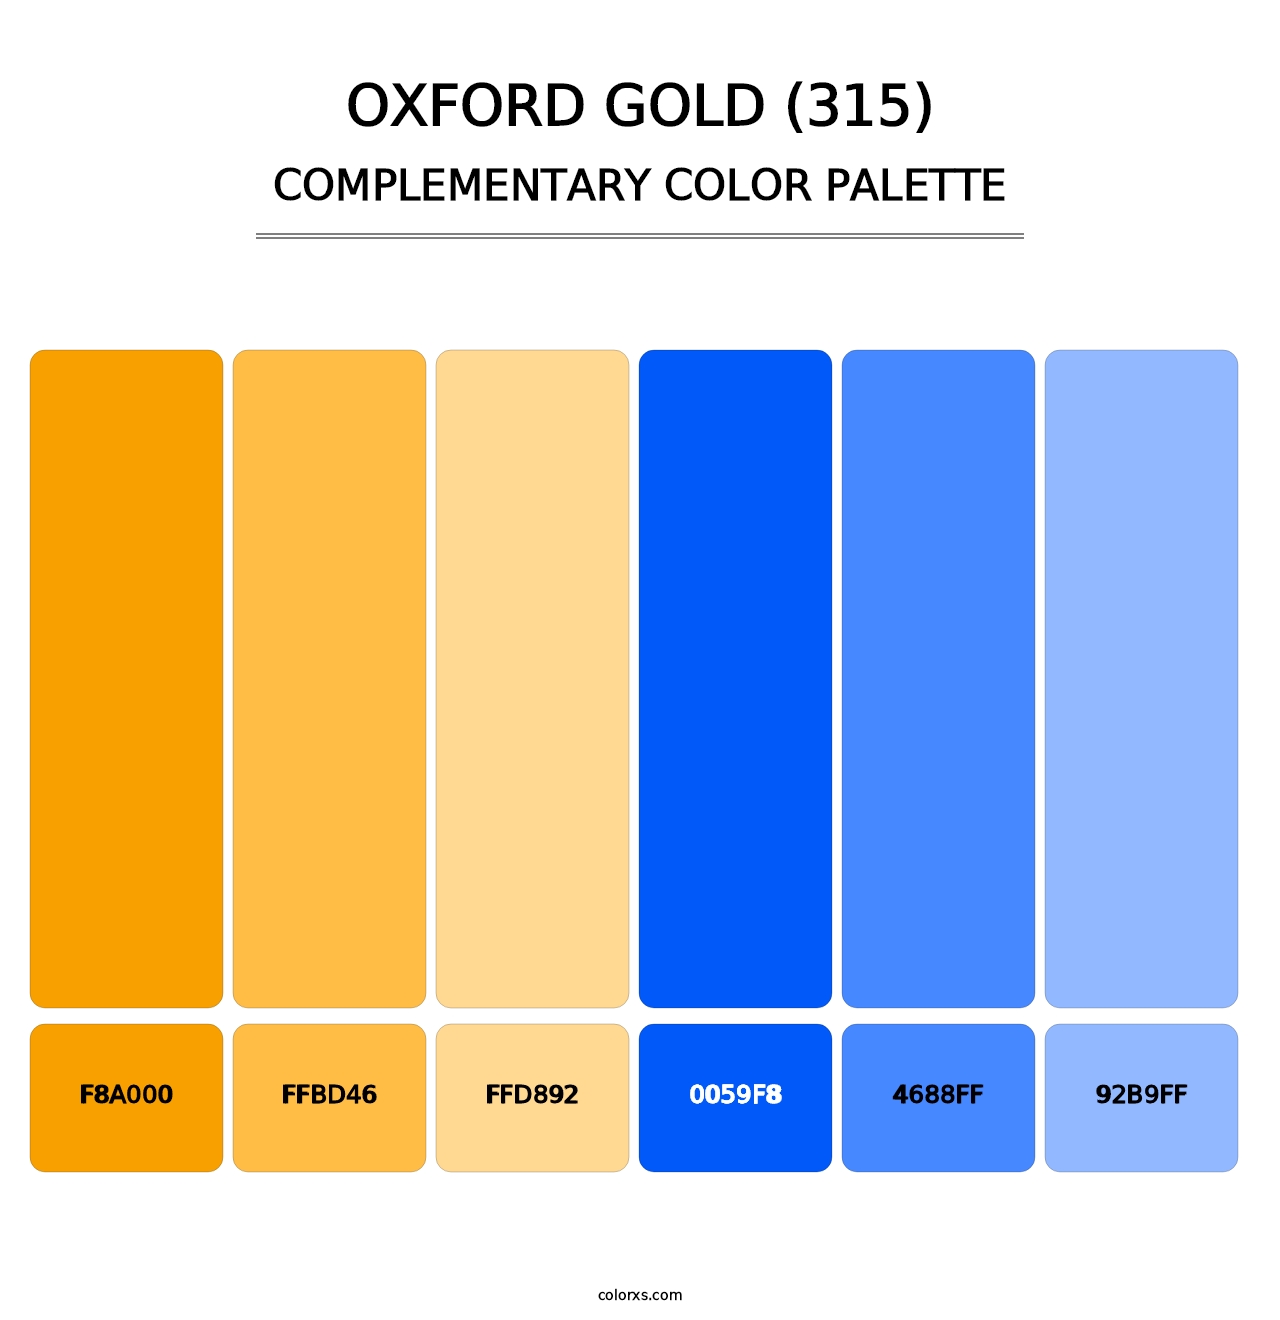 Oxford Gold (315) - Complementary Color Palette